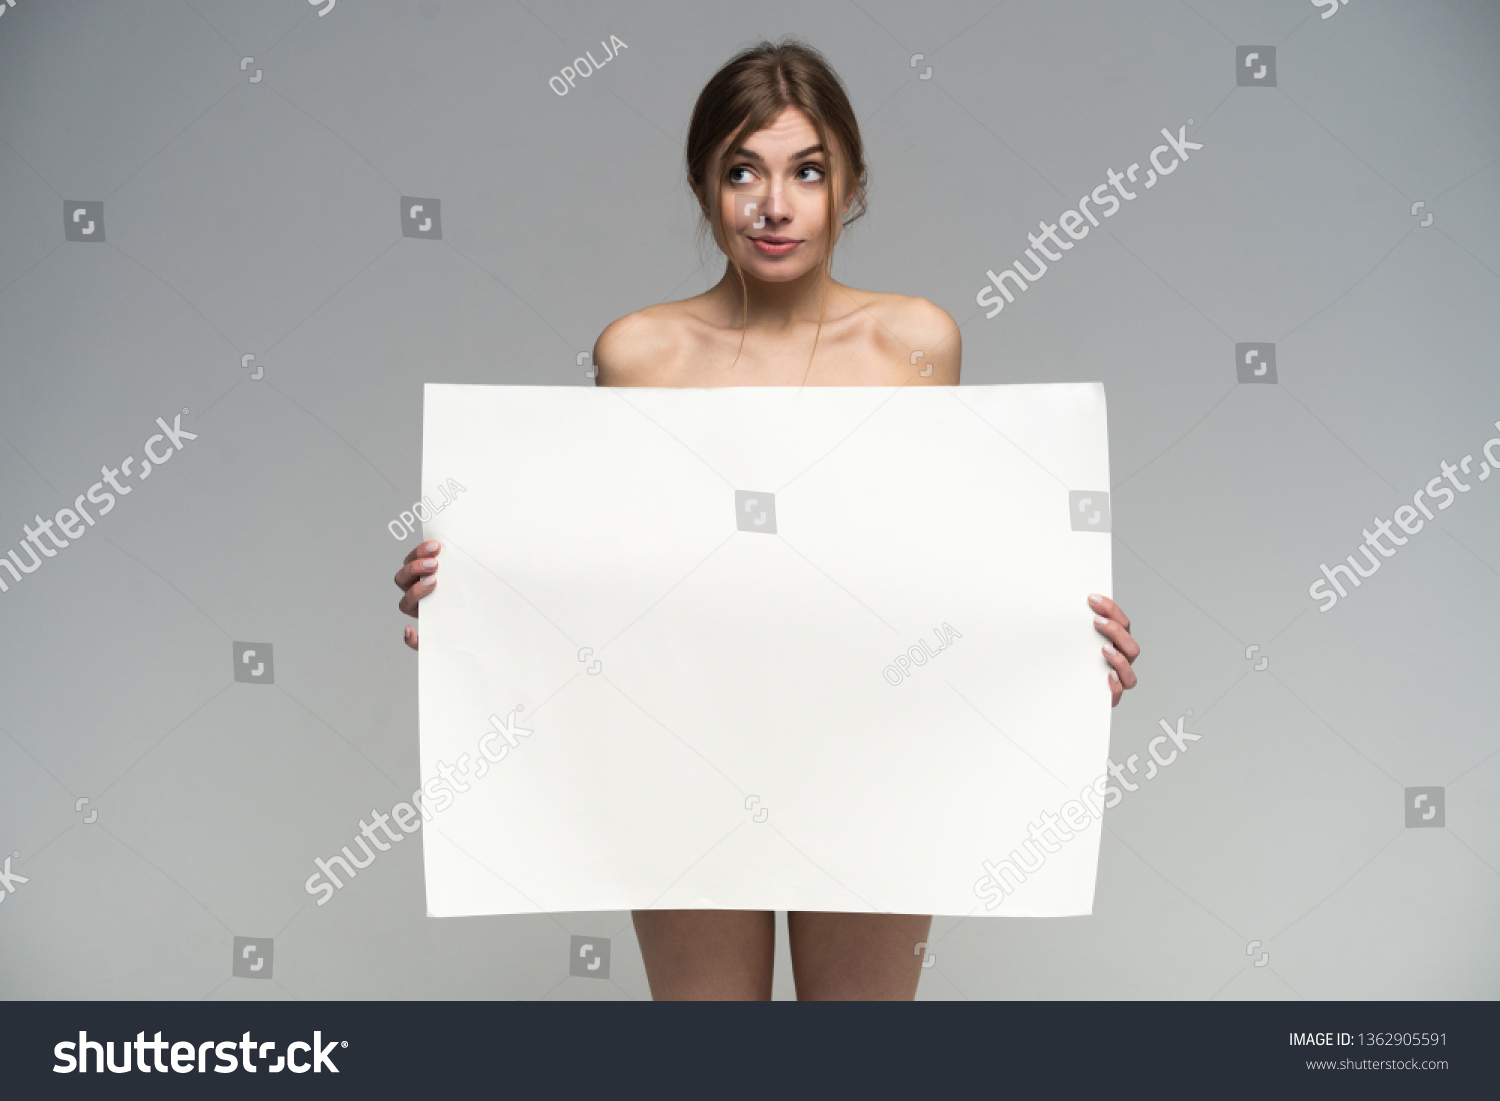 Sexy Naked Girl Poster Clean Skin库存照片 Shutterstock